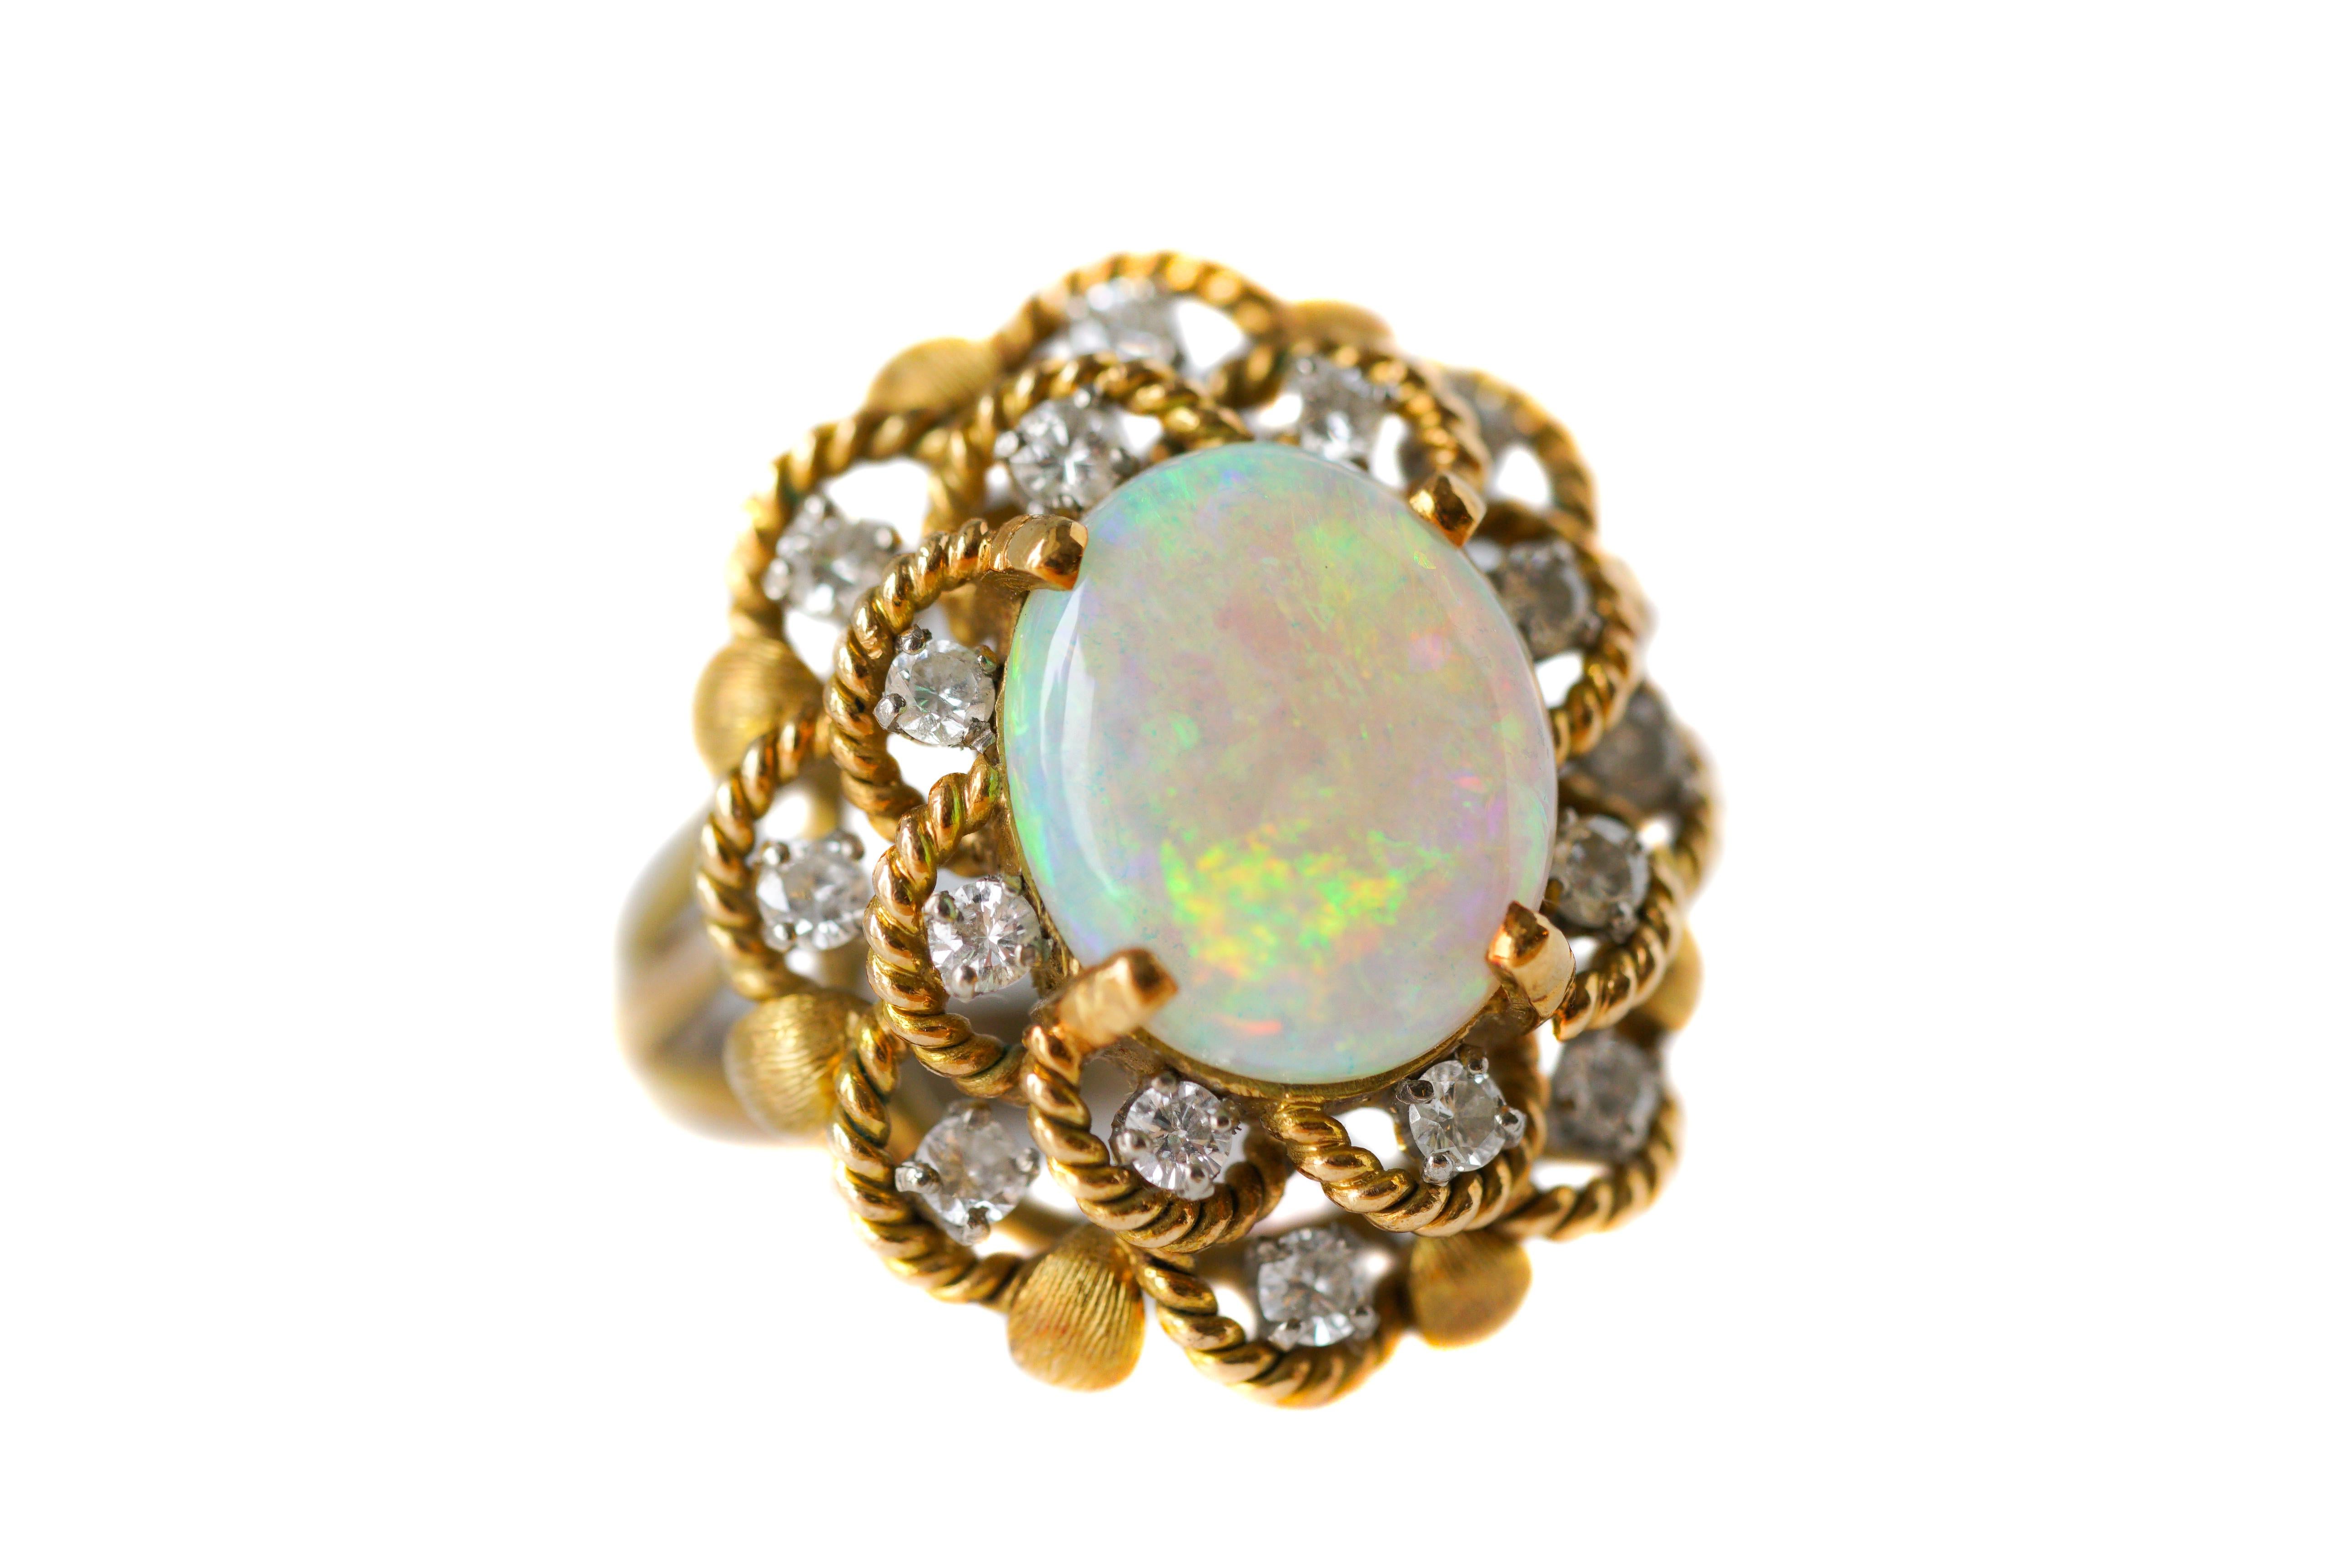 This stunning Victorian Era Ring features an Oval Opal Center Stone and a 1.2 carat total Diamond Halo, 16 Diamonds Total. 

The beautiful gemstones are prong-set in a Floral 14 karat Yellow Gold Cathedral Setting with Open Cutout Gallery and Split